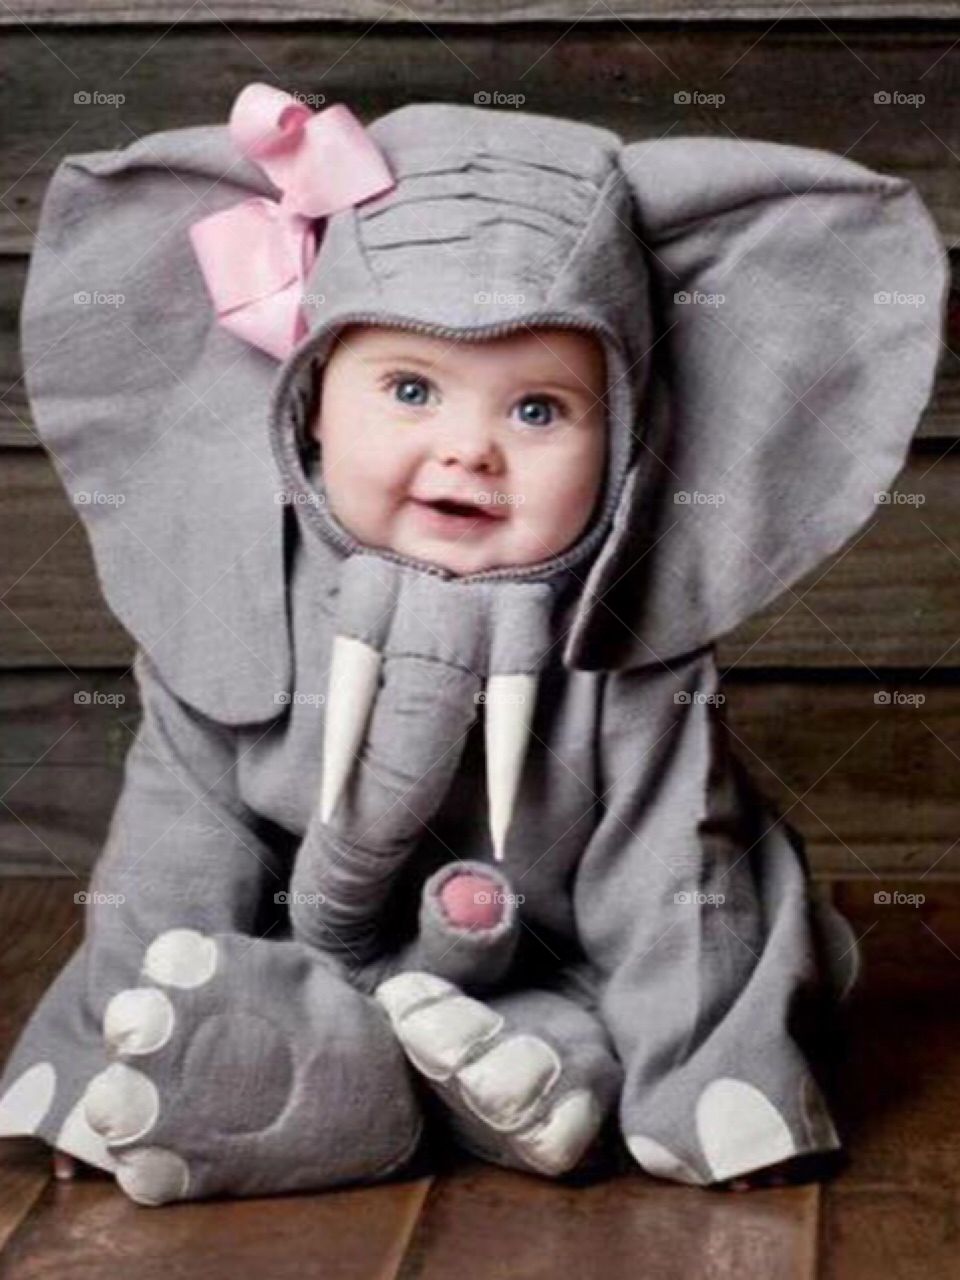 Have you seen baby elephant? 😊😊